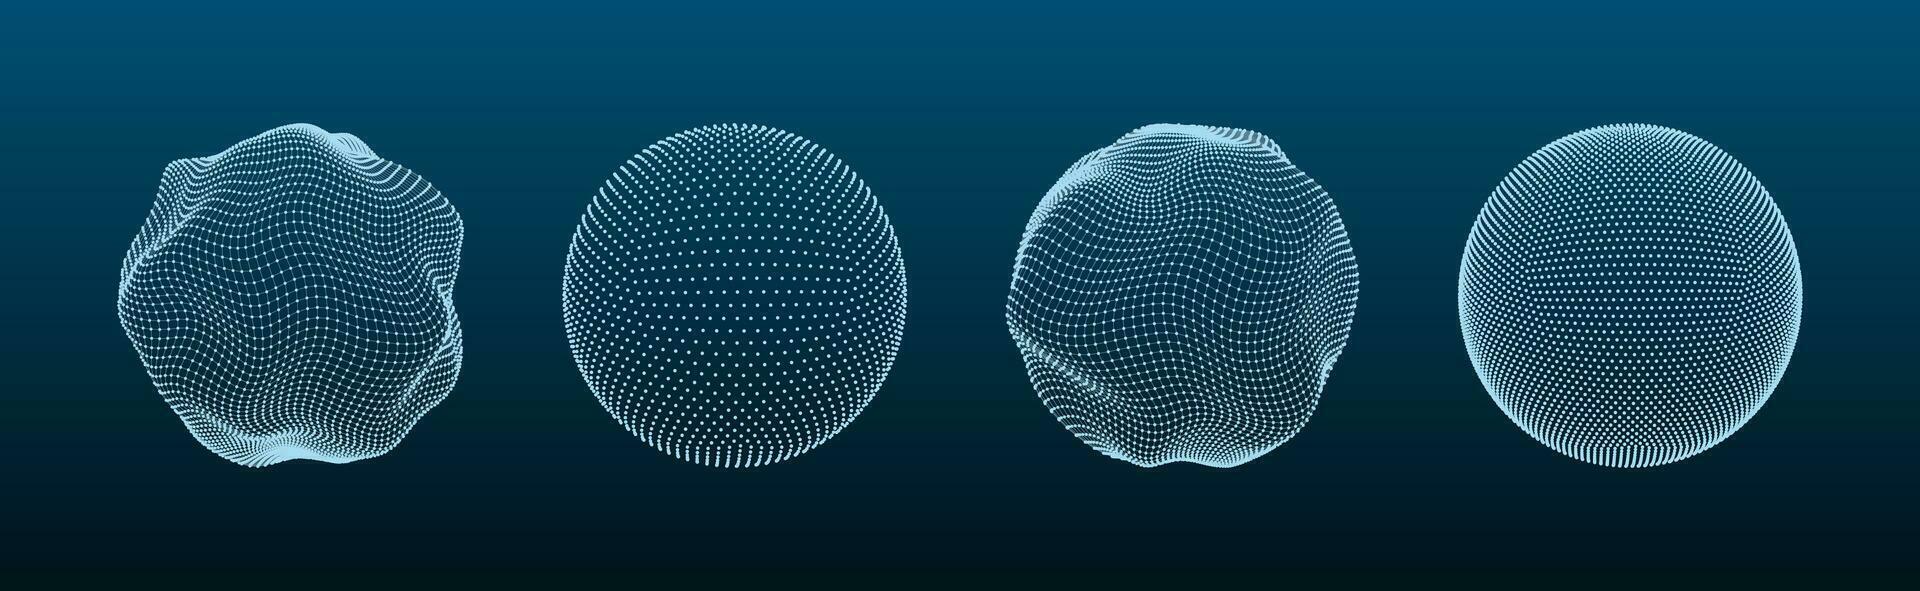 3D sphere mesh. Globe shapes with dots and line grid, orb wire structure models matrix futuristic concept. Digital polygonal balls with particles vector set